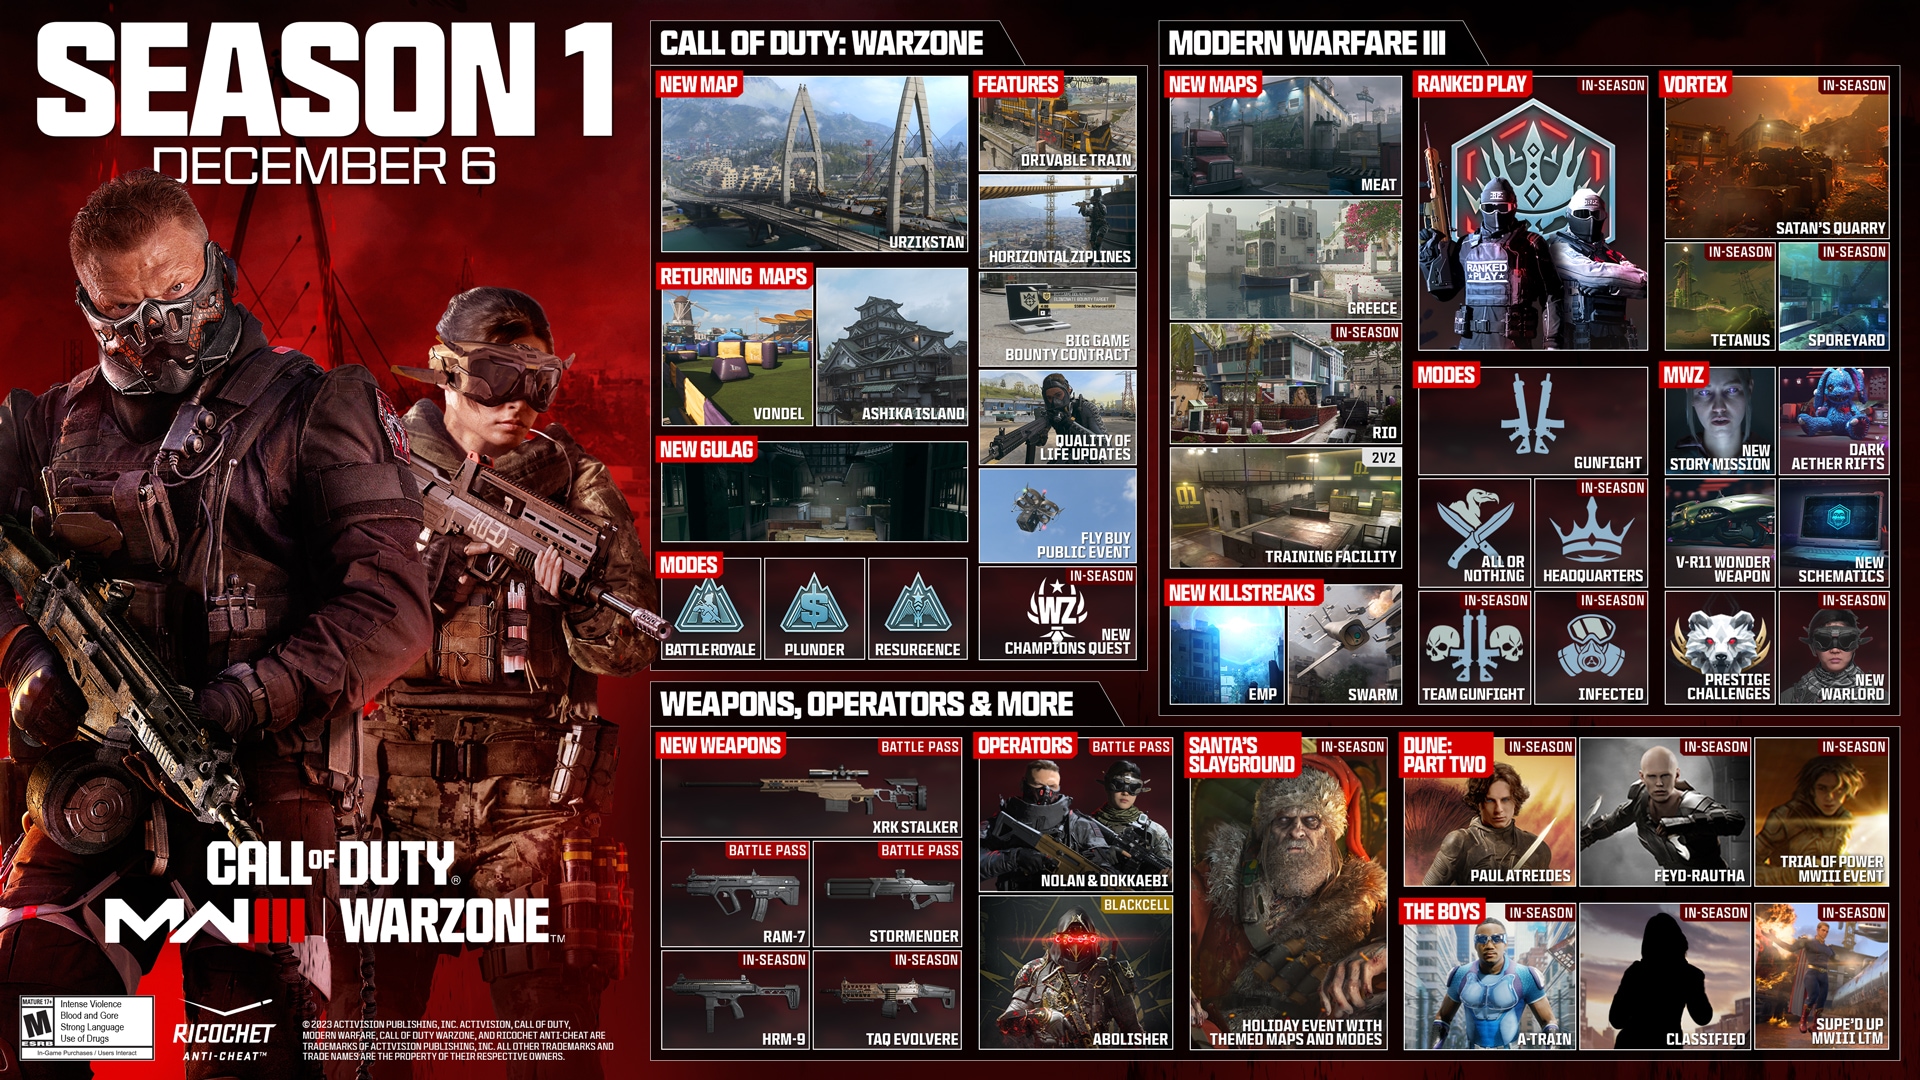 Season 1 of Call of Duty: Modern Warfare III and Call of Duty: Warzone—All You Need to Know